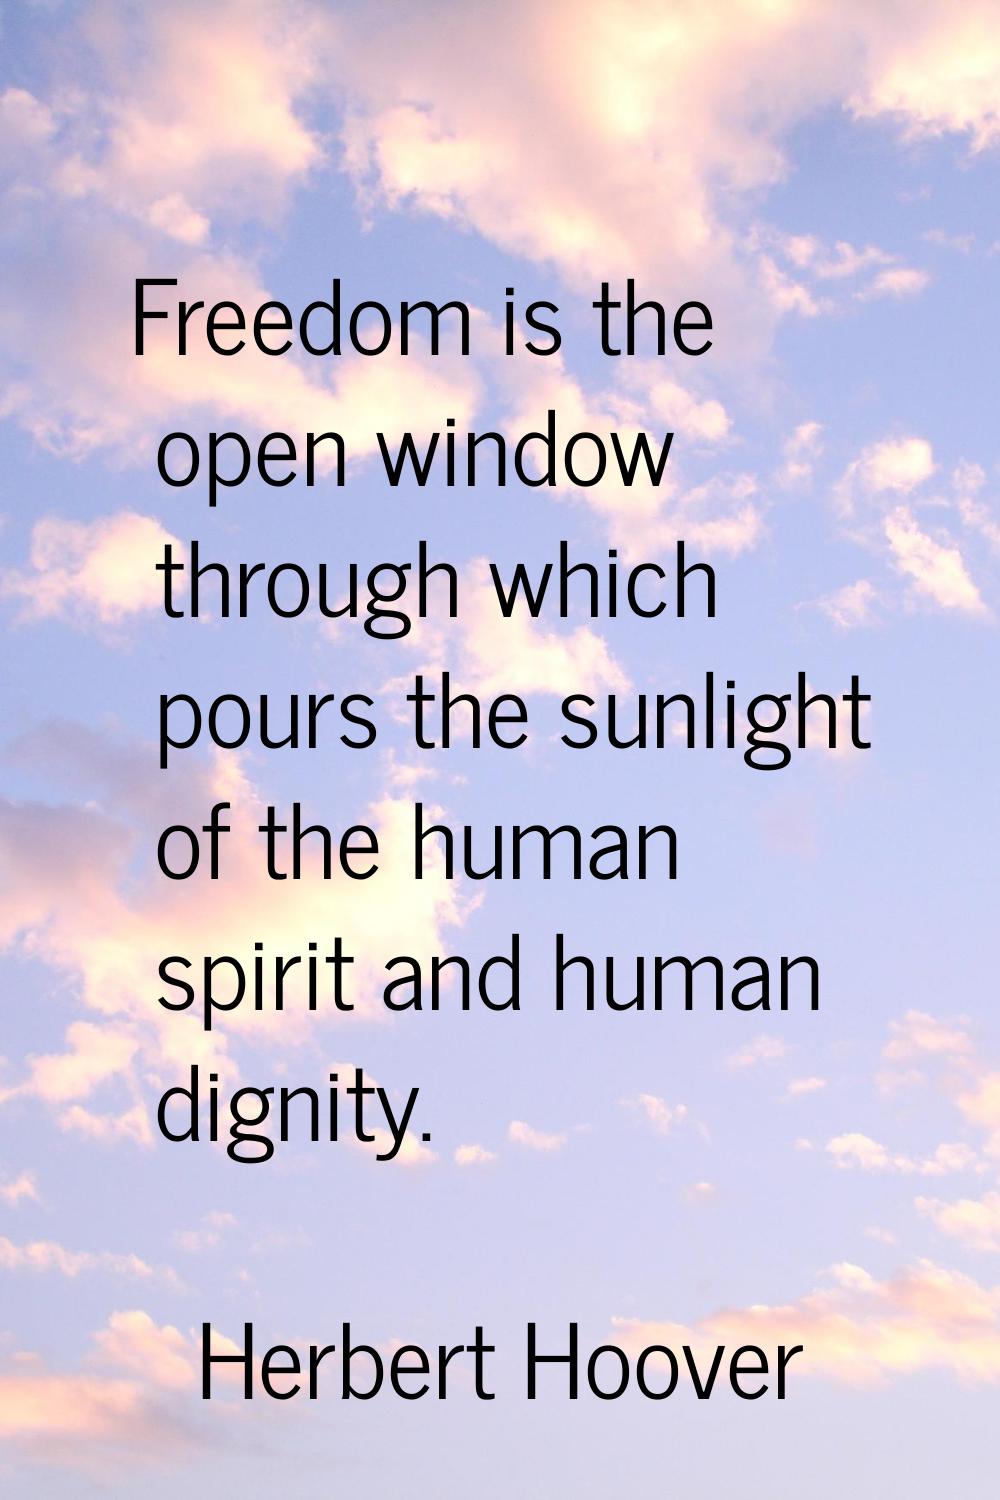 Freedom is the open window through which pours the sunlight of the human spirit and human dignity.